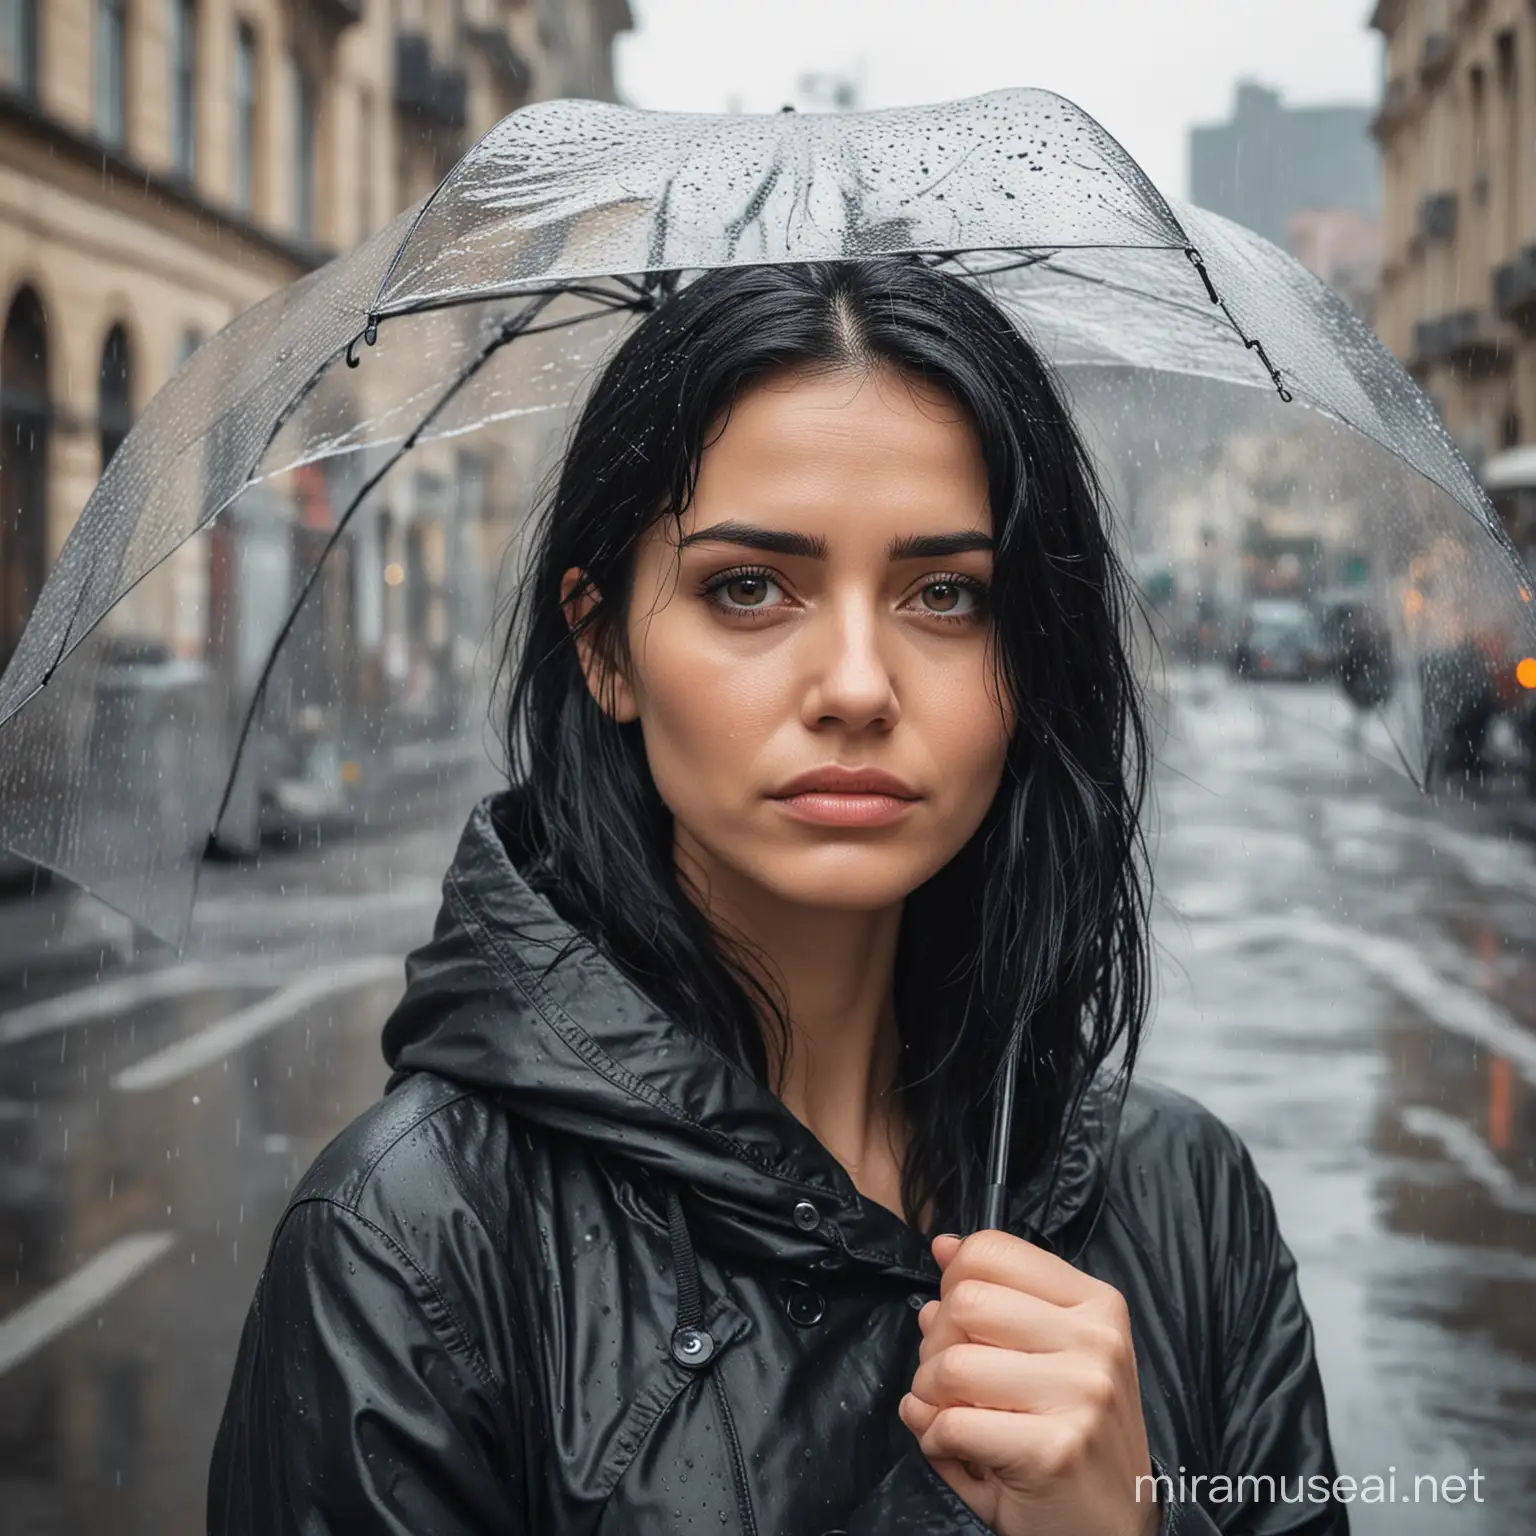 Melancholic BlackHaired Woman in an Urban Rainstorm without Protection